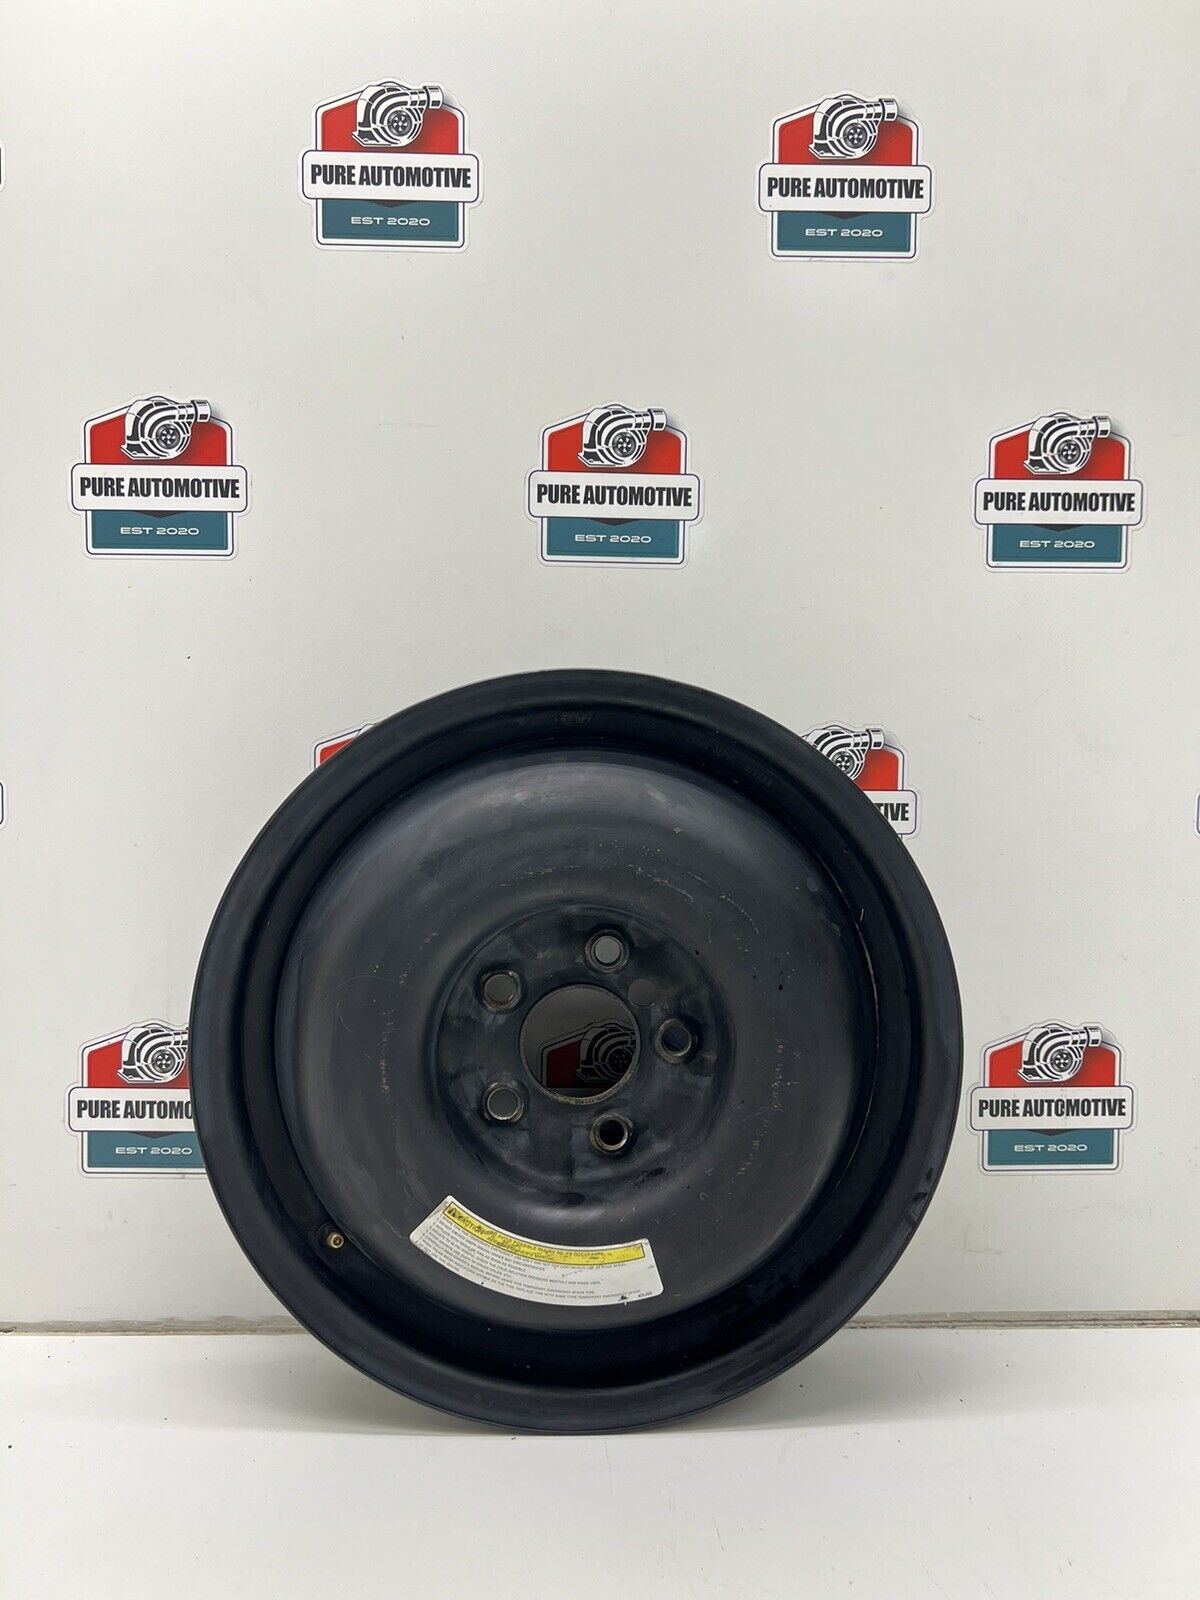 2003-2007 Nissan 350Z Infiniti G35 Coupe Spare Wheel Donut Without Tire OEM